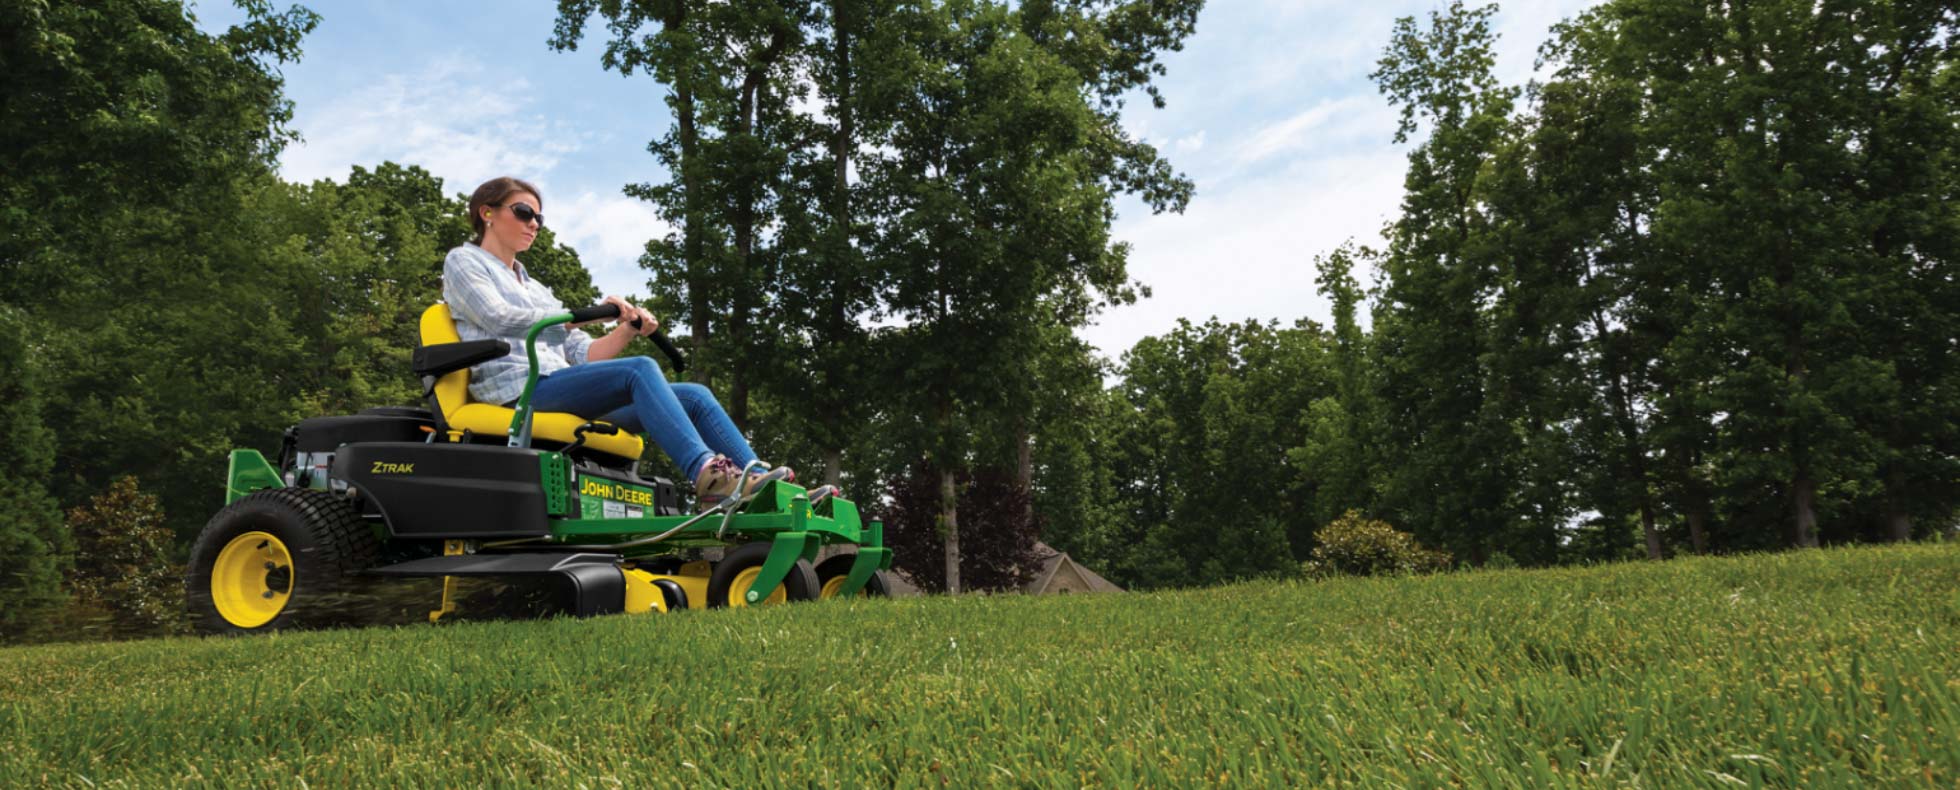 Three Things to Know for First-Time Lawn Mower Buyers and Owners